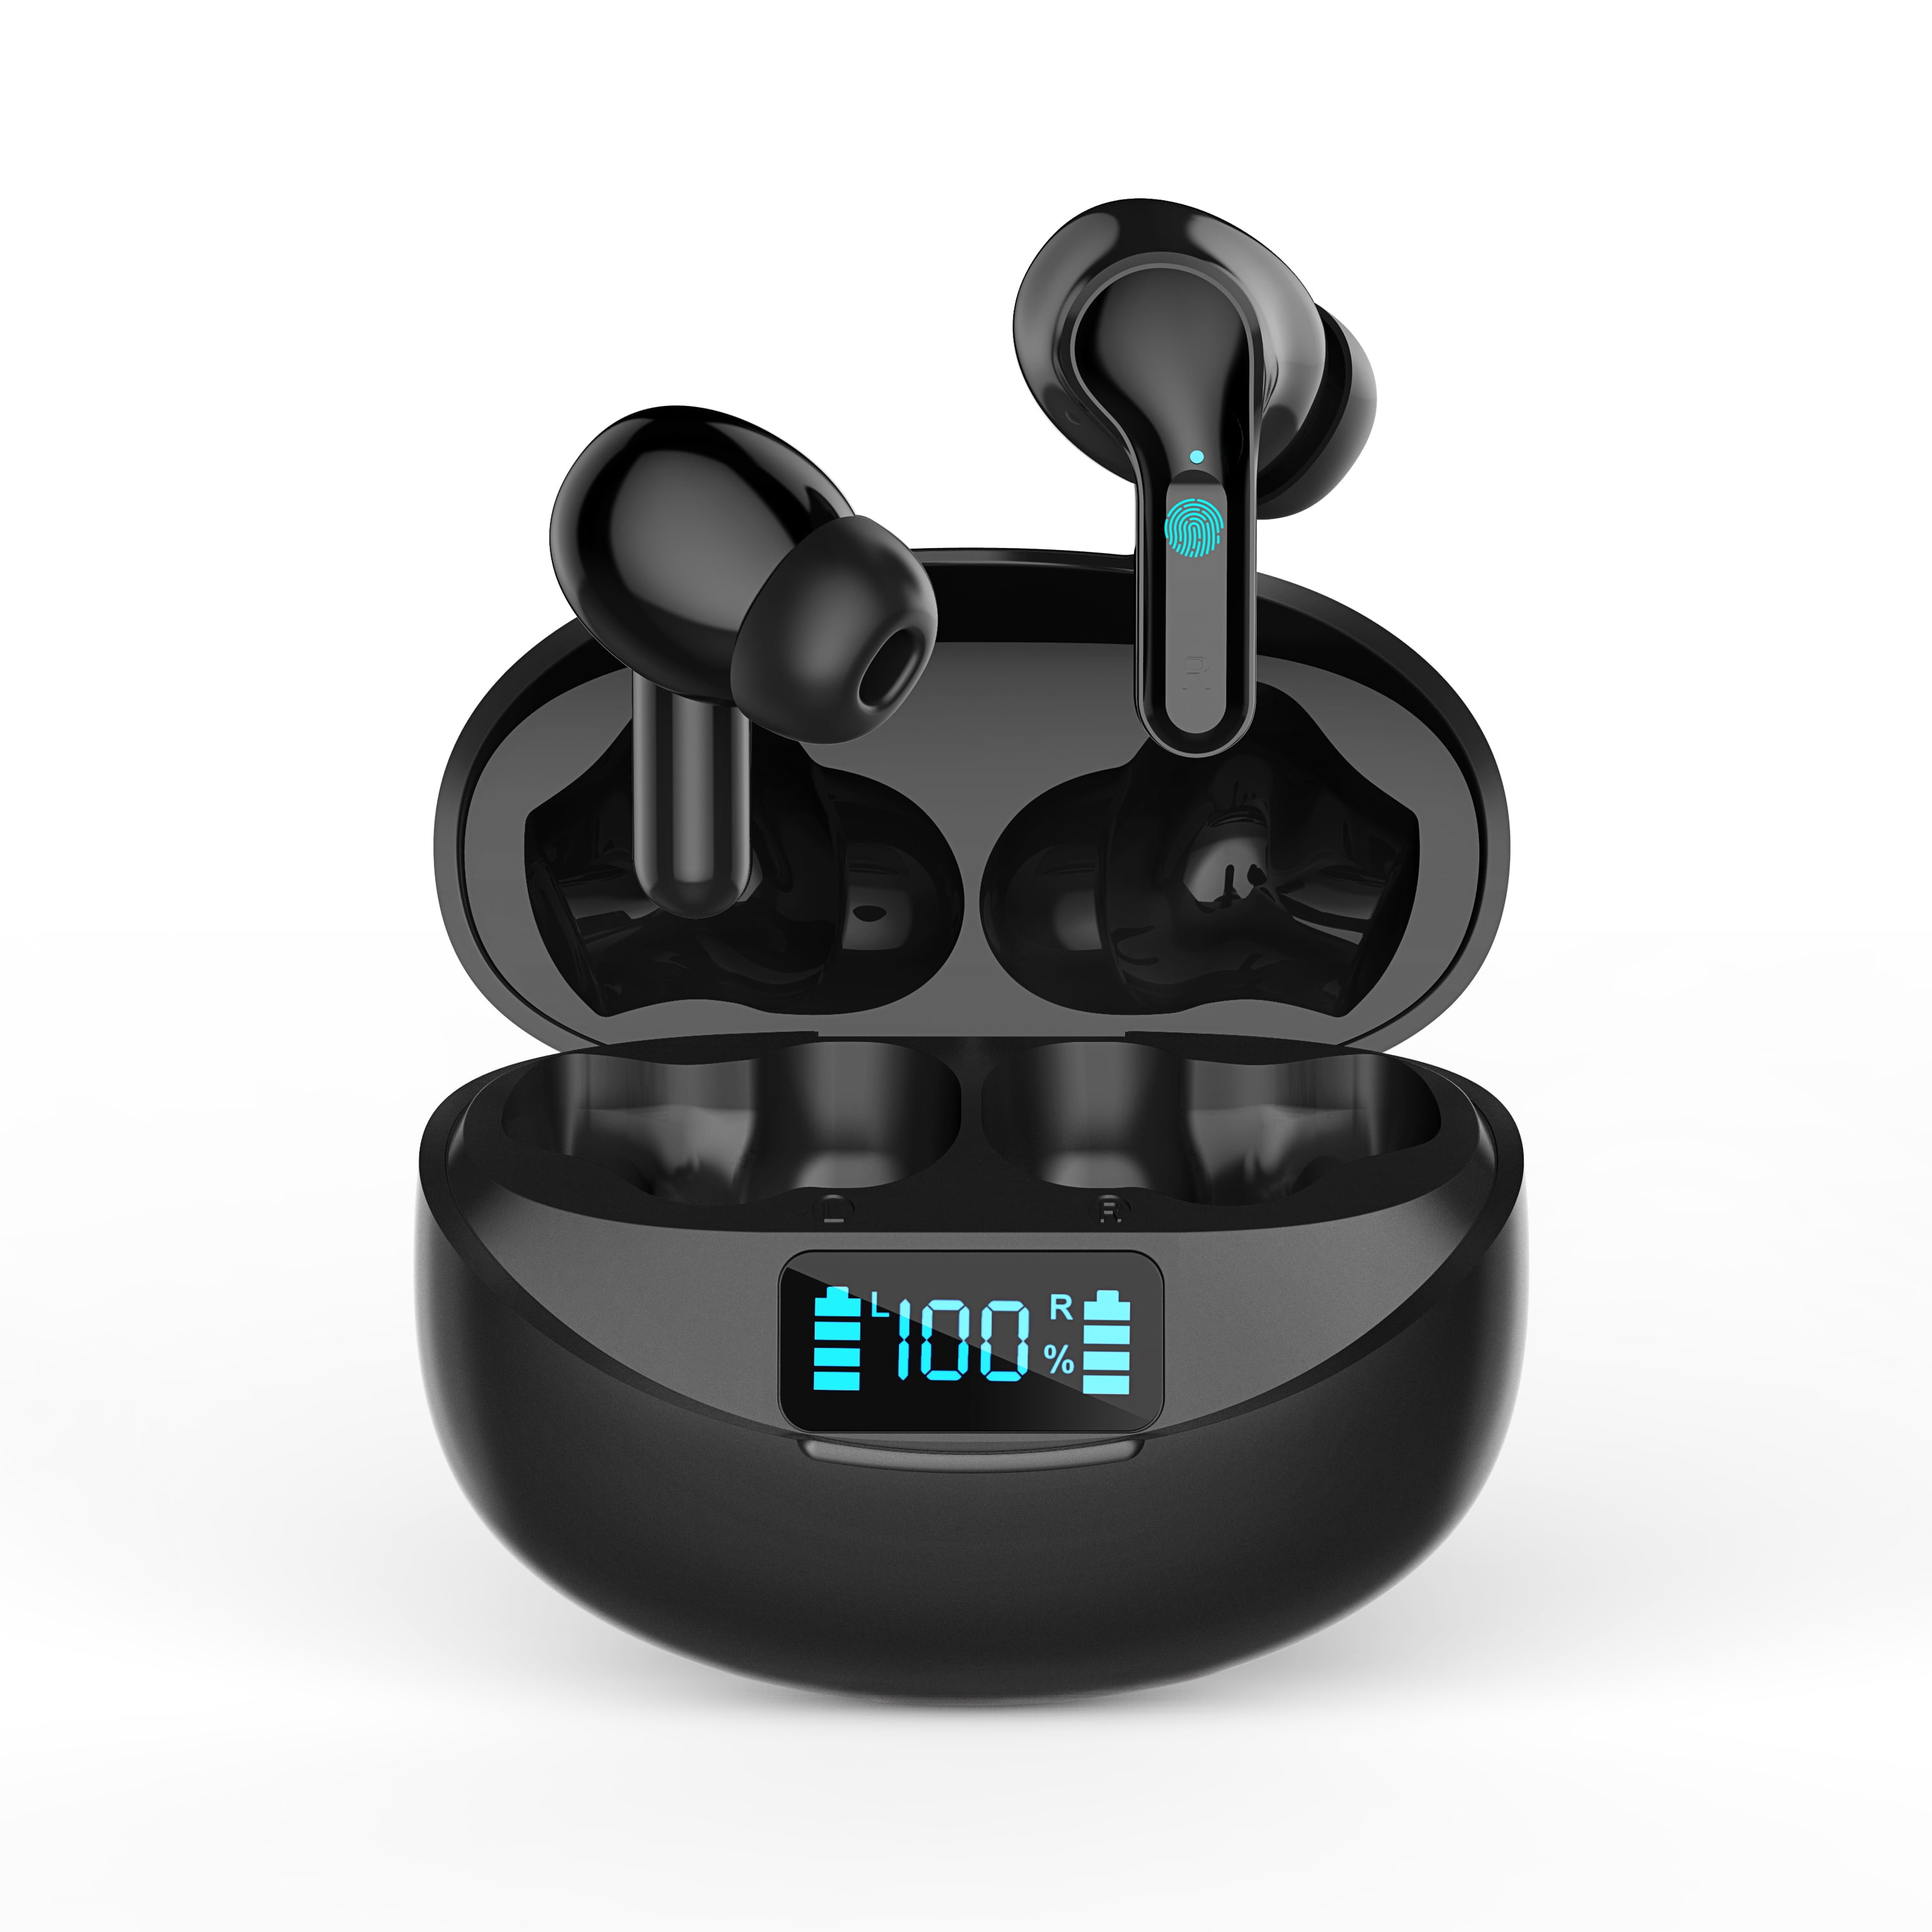 Xiaomi New 2021 Redmi Buds 3 Pro Airdots In-Ear Earbuds, 35dB Smart Noise  Cancellation, Dual-device connectivity, Wireless charging, 28hour battery